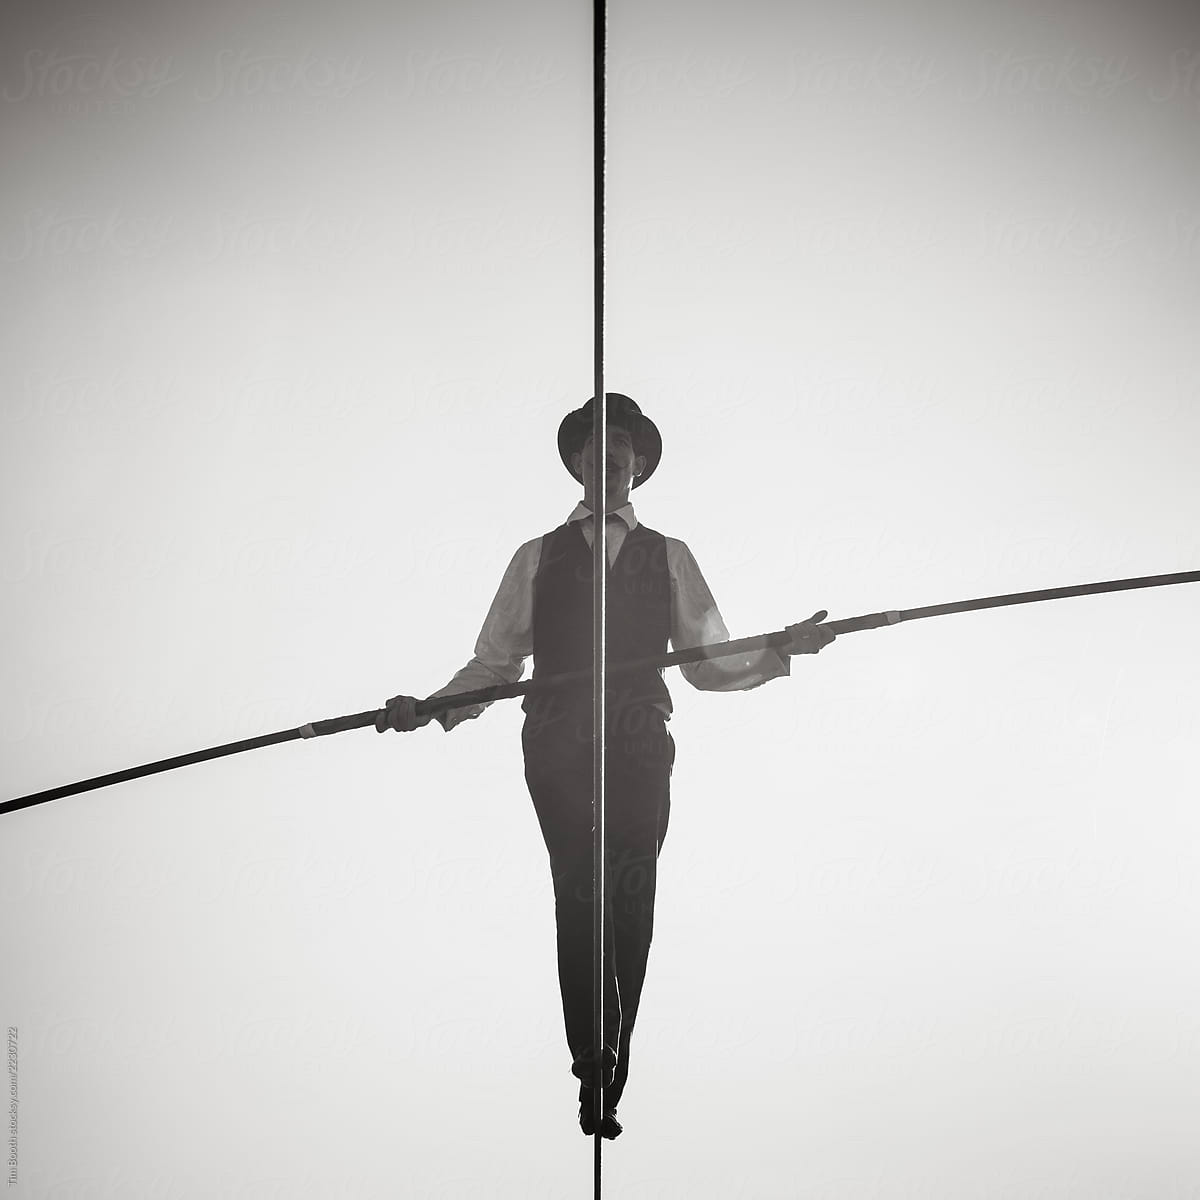 A monochrome image of a tightrope walker